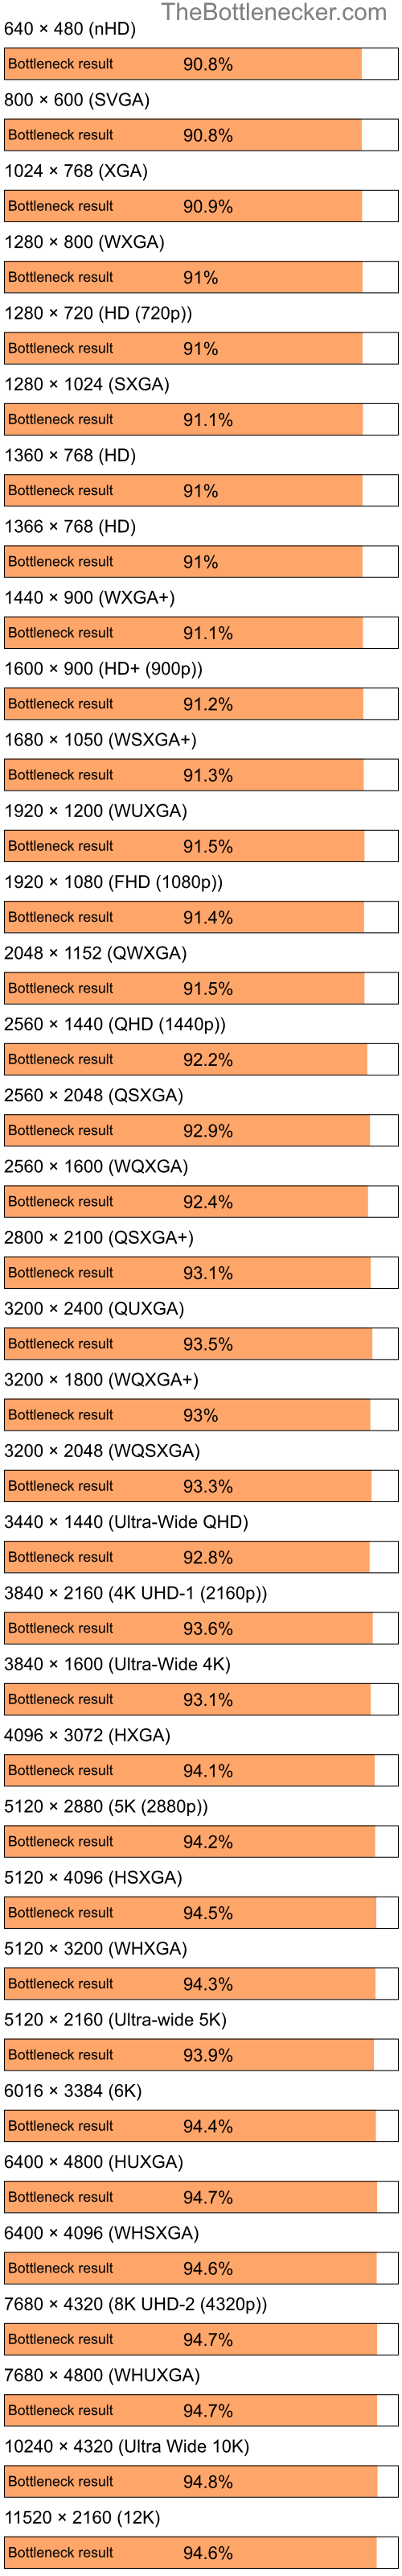 Bottleneck results by resolution for Intel Pentium 4 and NVIDIA GeForce4 MX Integrated GPU in Graphic Card Intense Tasks